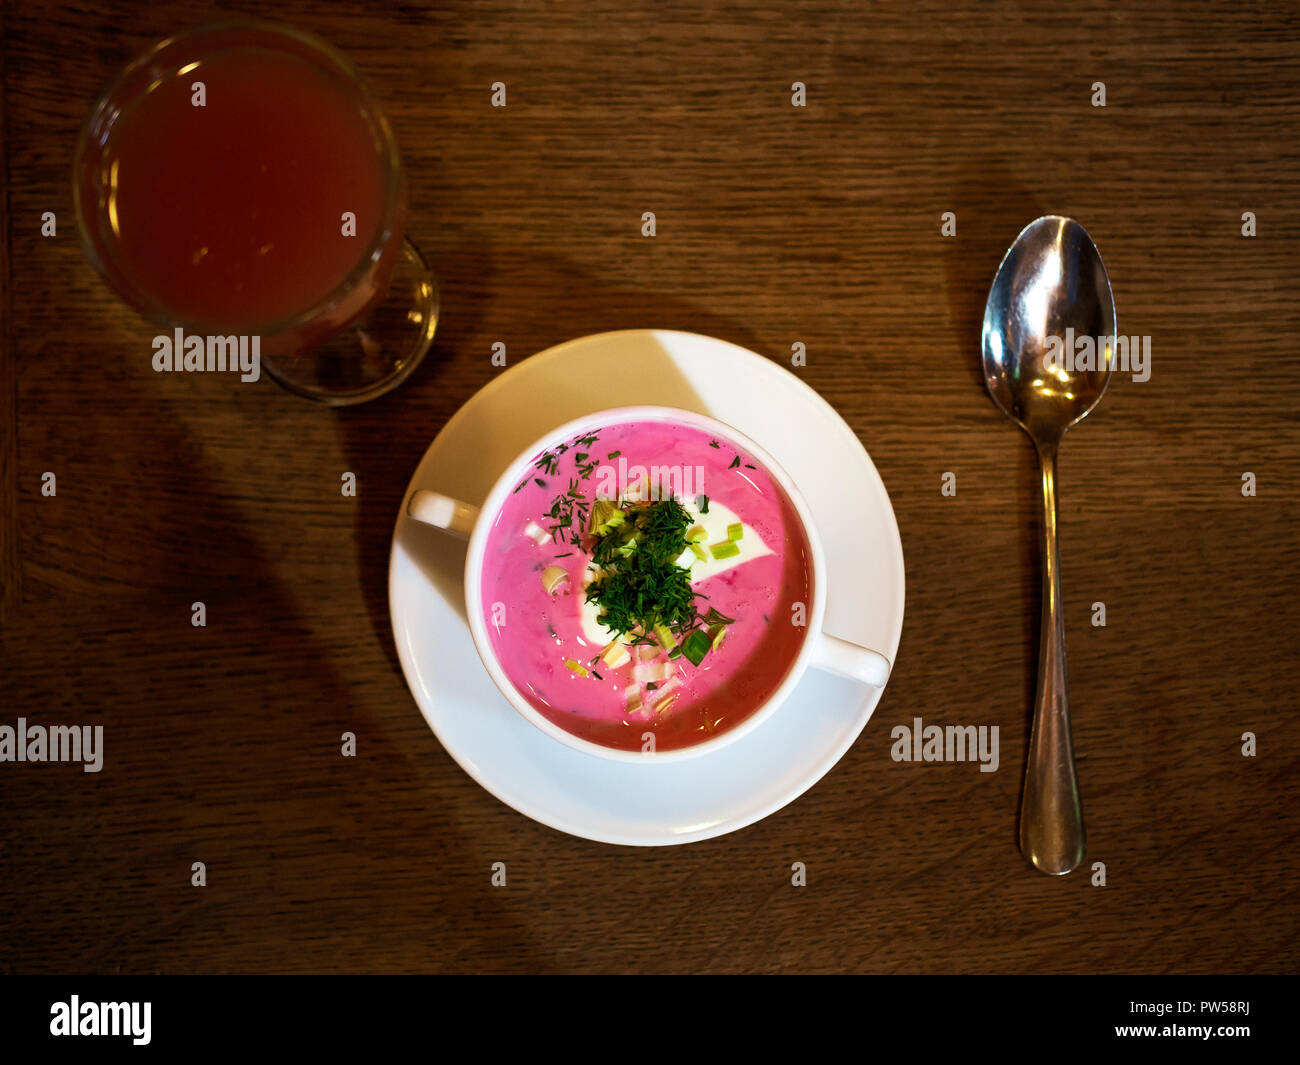 Saltibarsciai, or Lithuanian cold borscht, blended with sour cream (yogurt), and sprinkled with chives Stock Photo